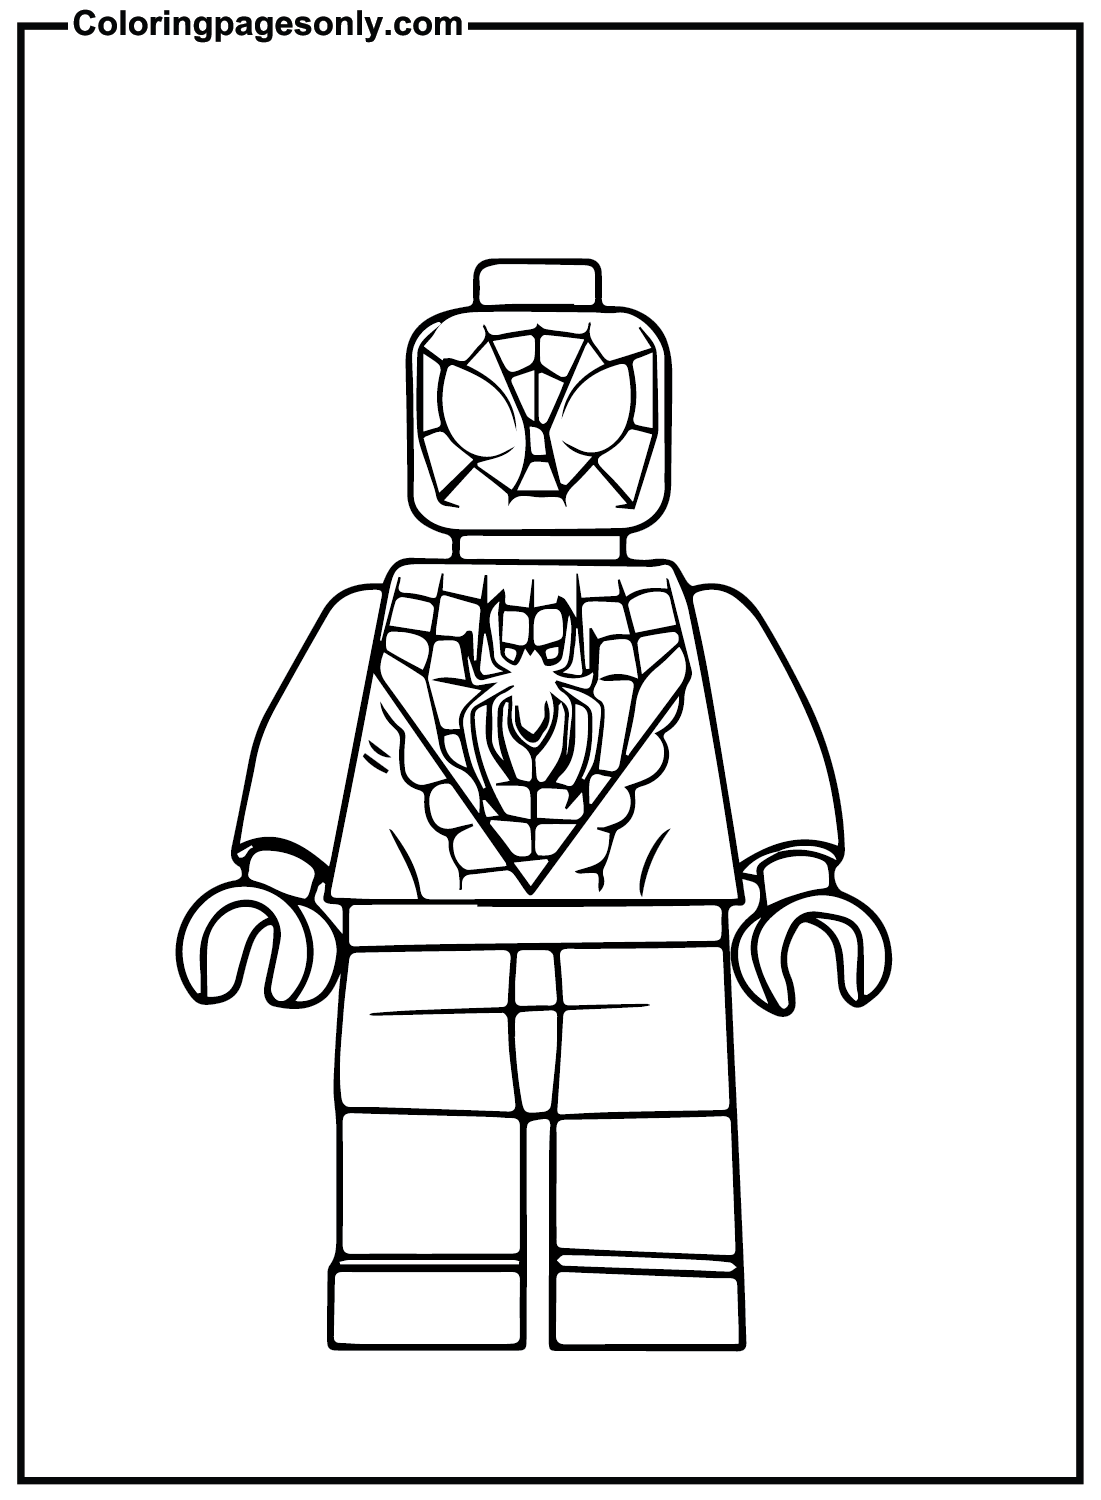 Legos Spiderman printable Coloring Pages - Lego Spiderman Coloring Pages -  Coloring Pages For Kids And Adults